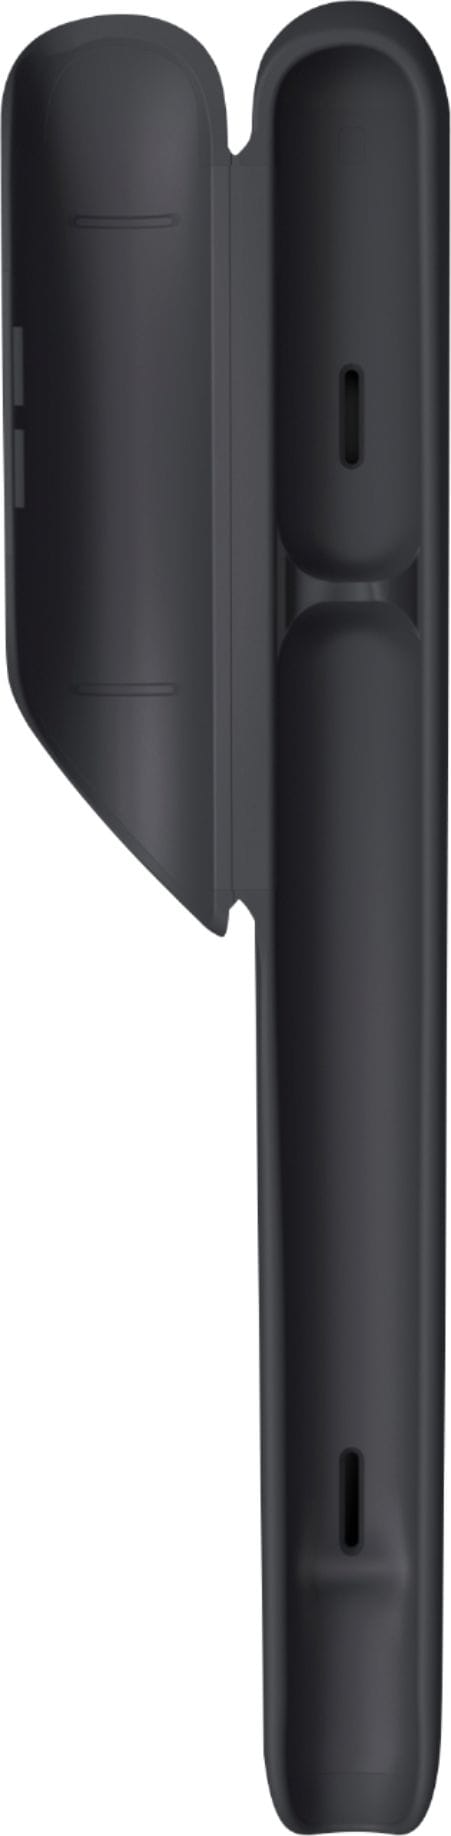 Philips Sonicare - Philips One by Sonicare Rechargeable Toothbrush - Shadow_2